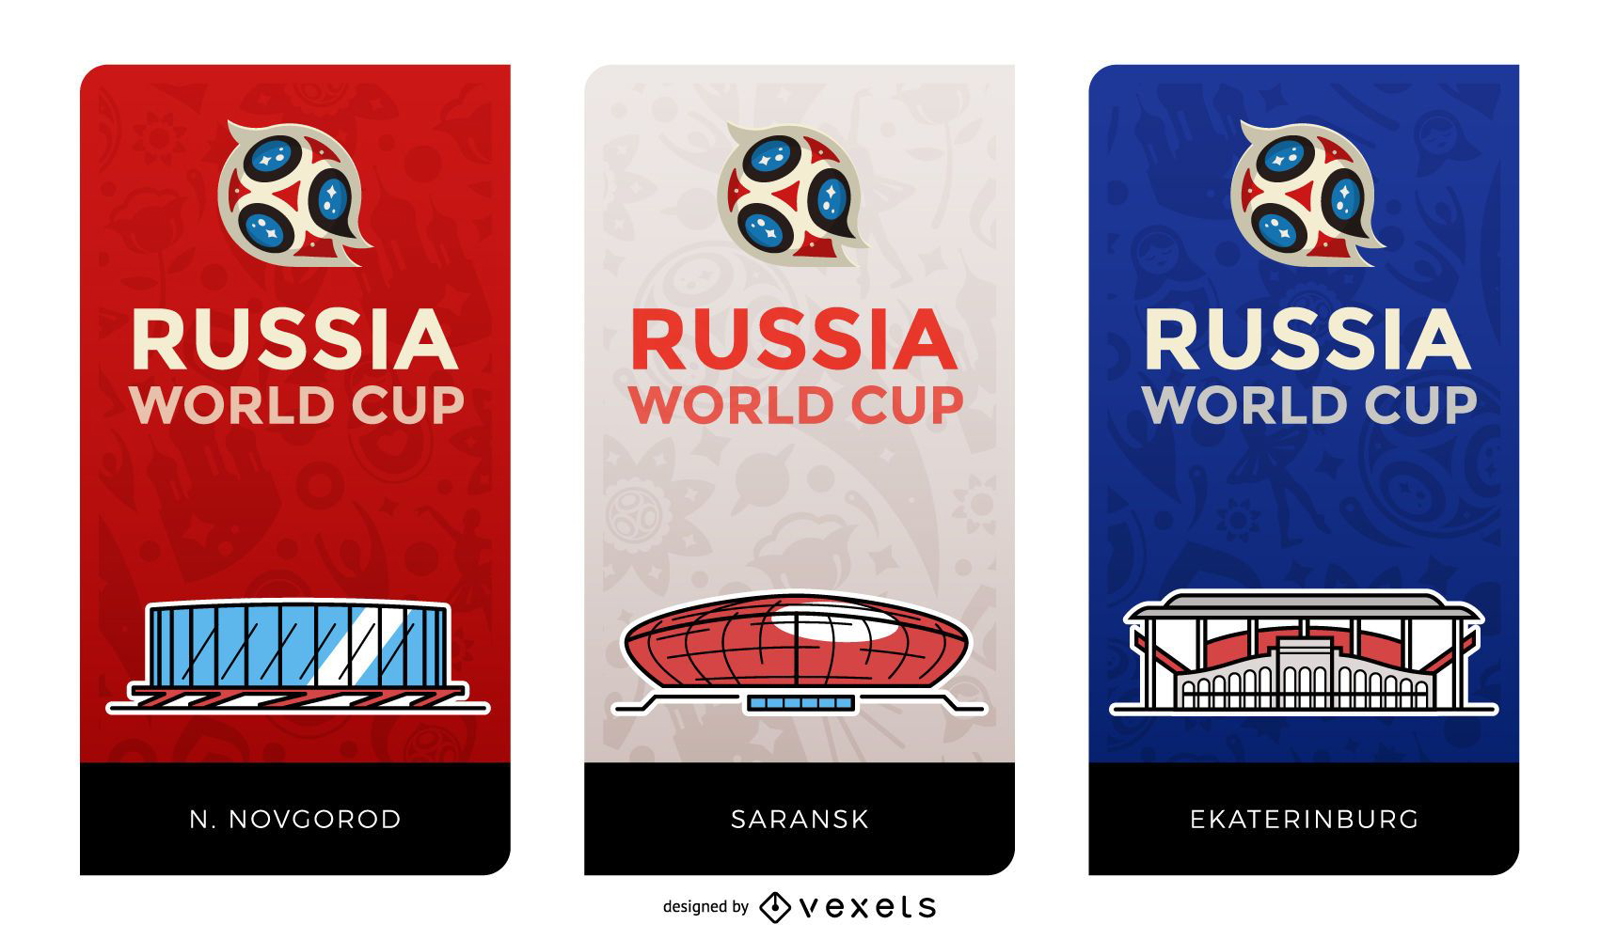 Russia world cup stadium banners